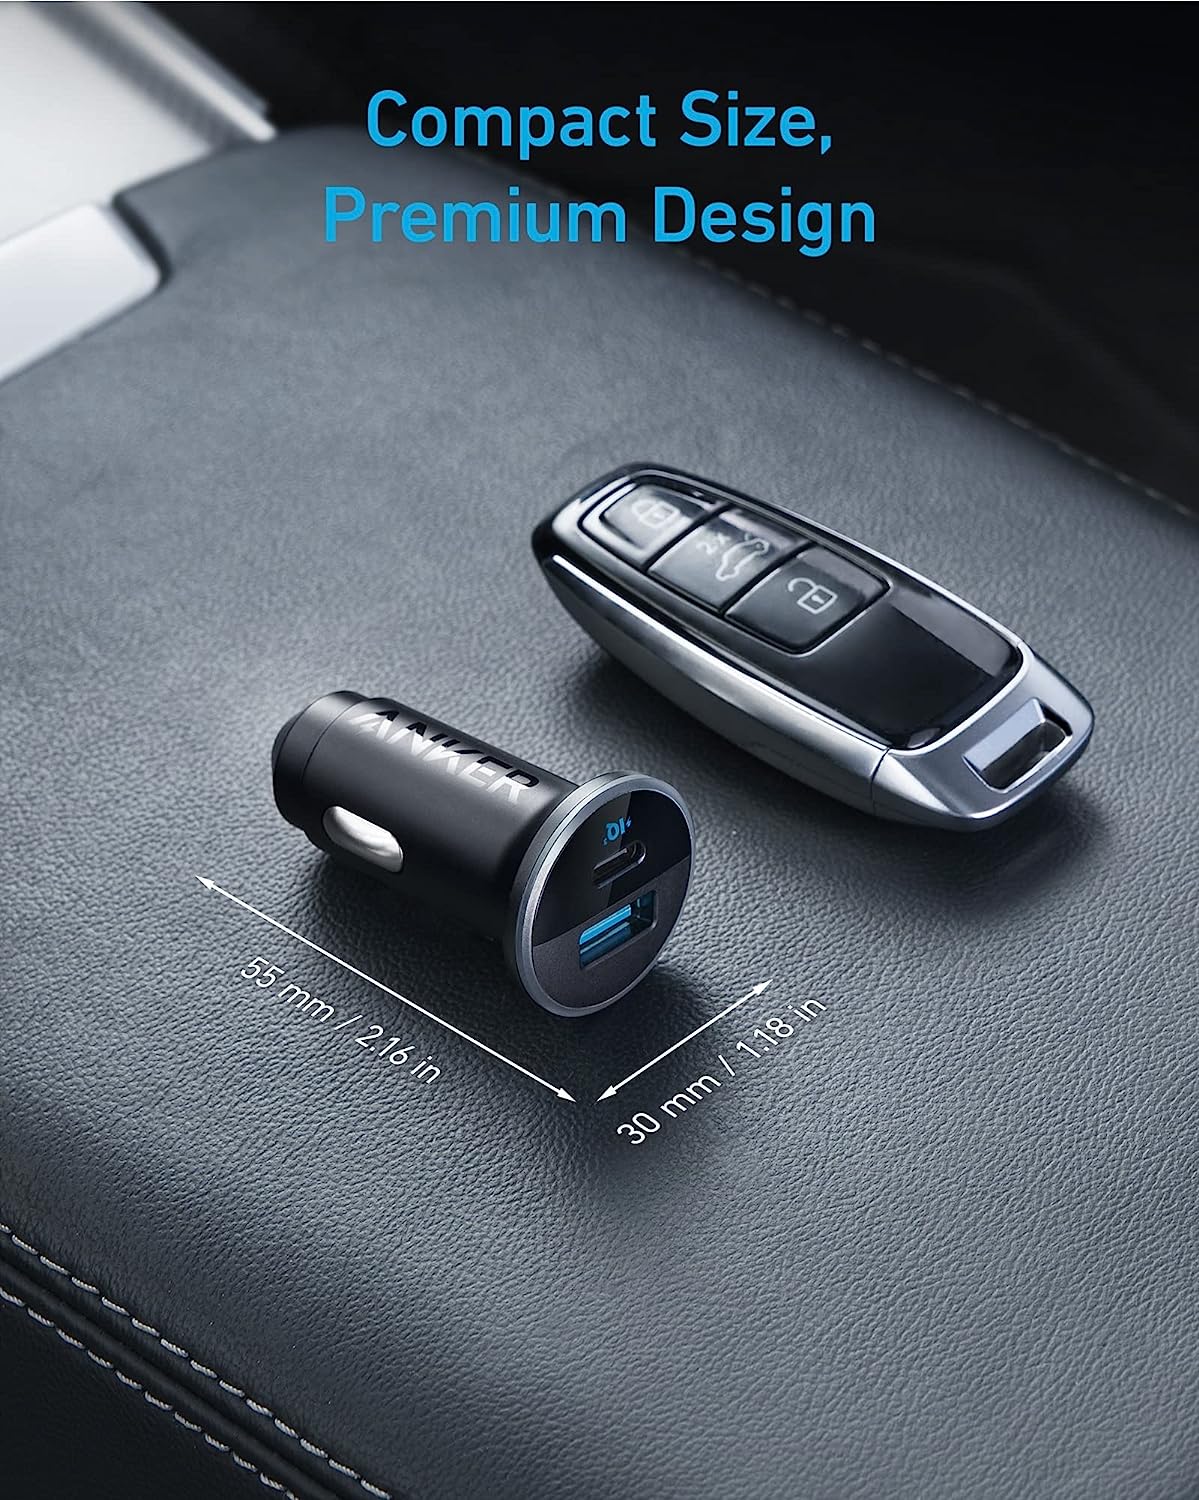 USB C Car Charger Adapter, Anker 52.5W Cigarette Lighter USB Charger